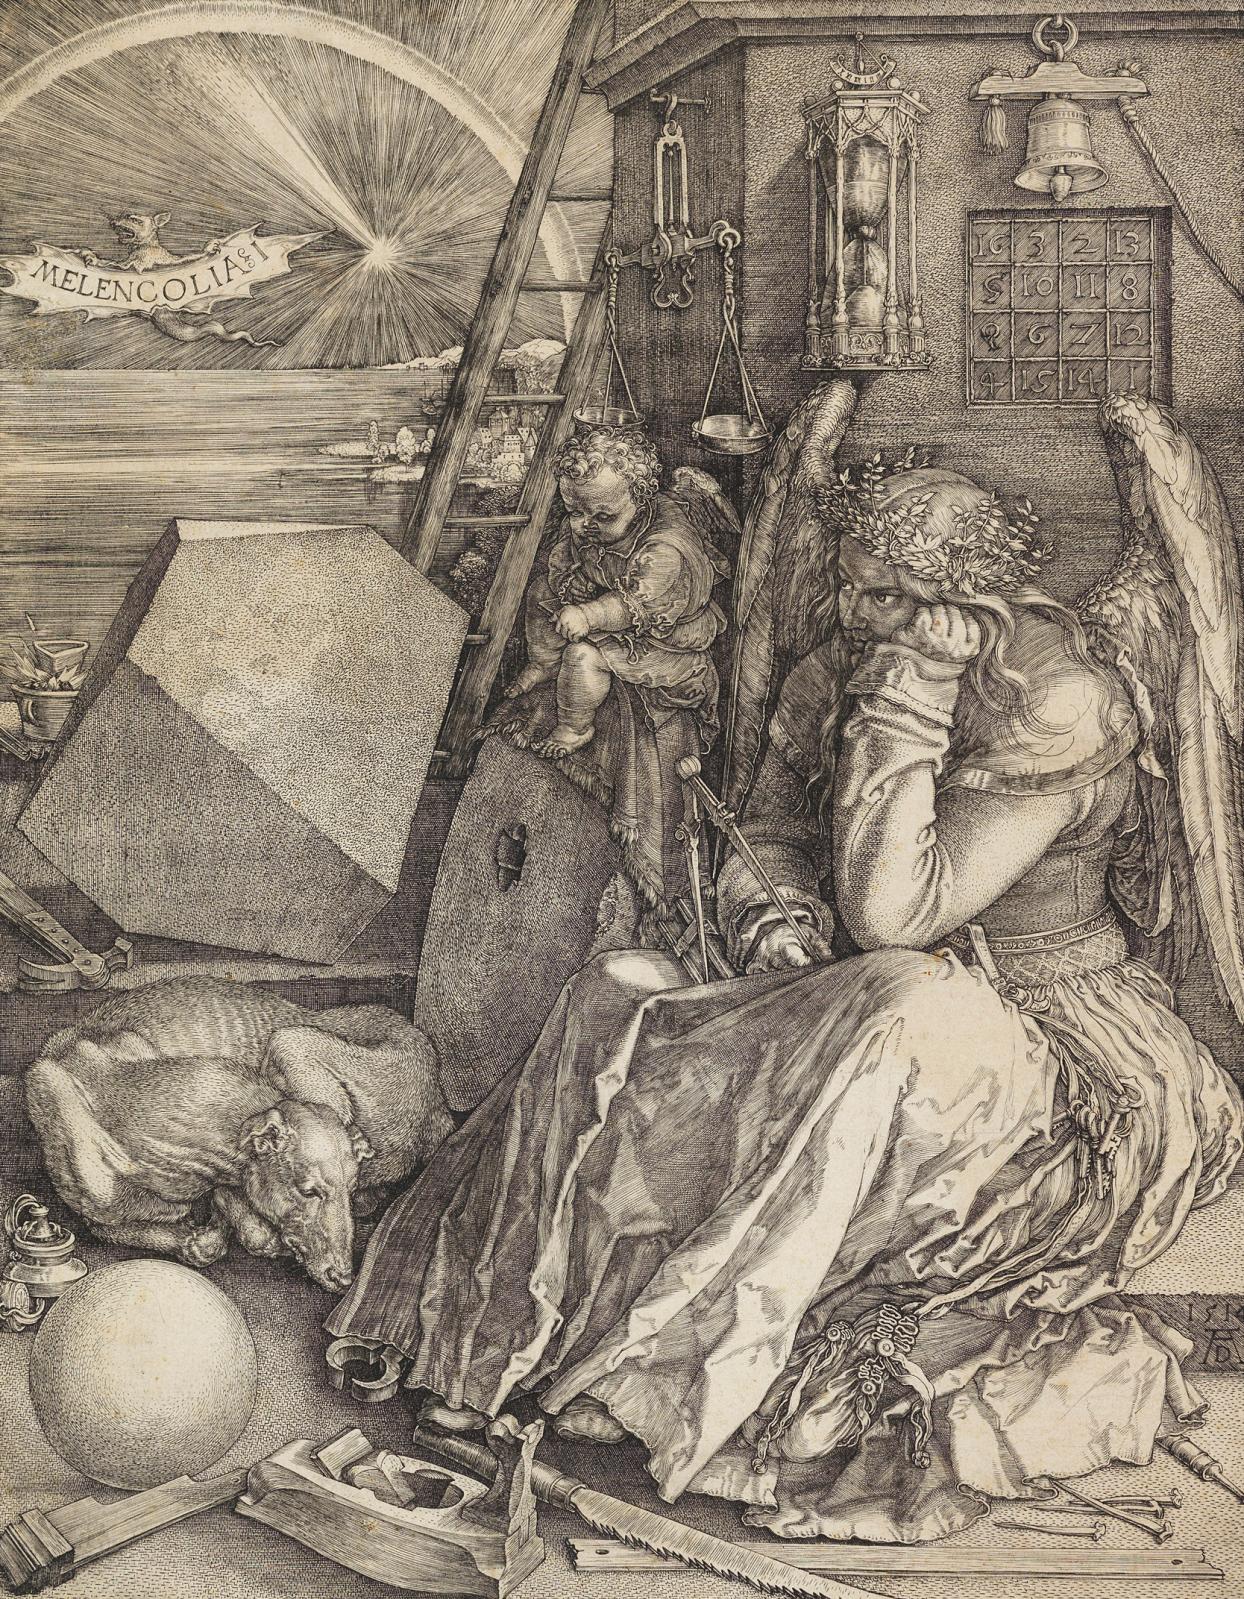 Albrecht Dürer, Melancholia I, 1514, engraving, 24.4 × 19 cm/9.6 x 7.4 in.Image courtesy of the National Gallery London, The Syndics of th